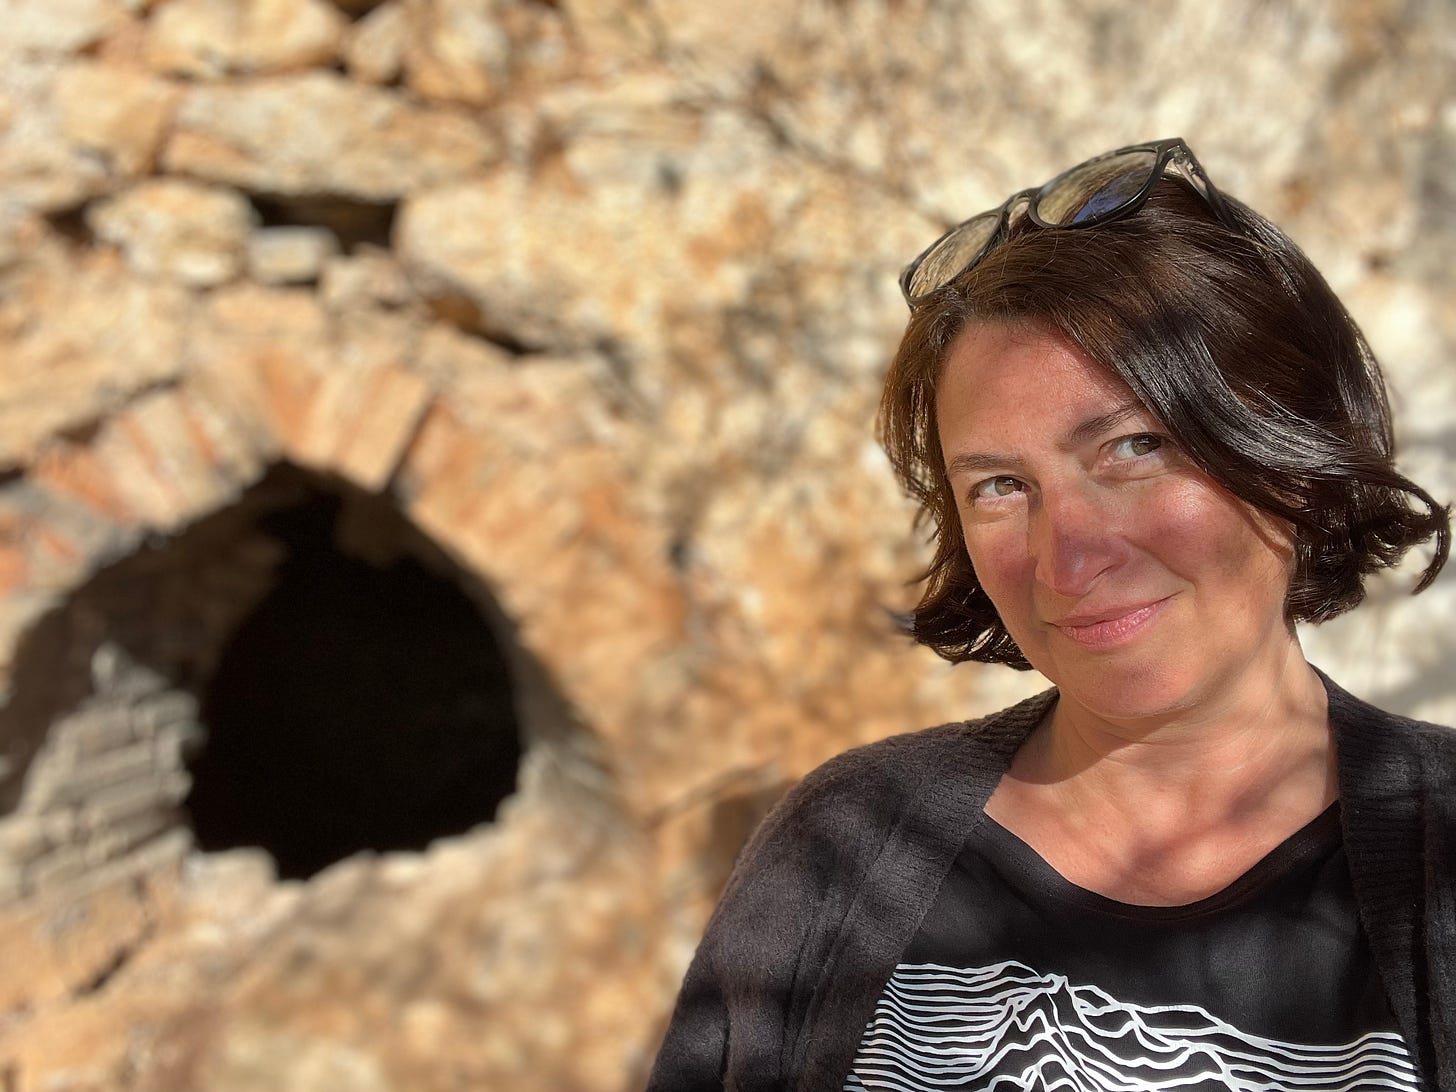 Colour photo of Sarah Farley standing in front of an old stone house, smiling and squinting at the sun